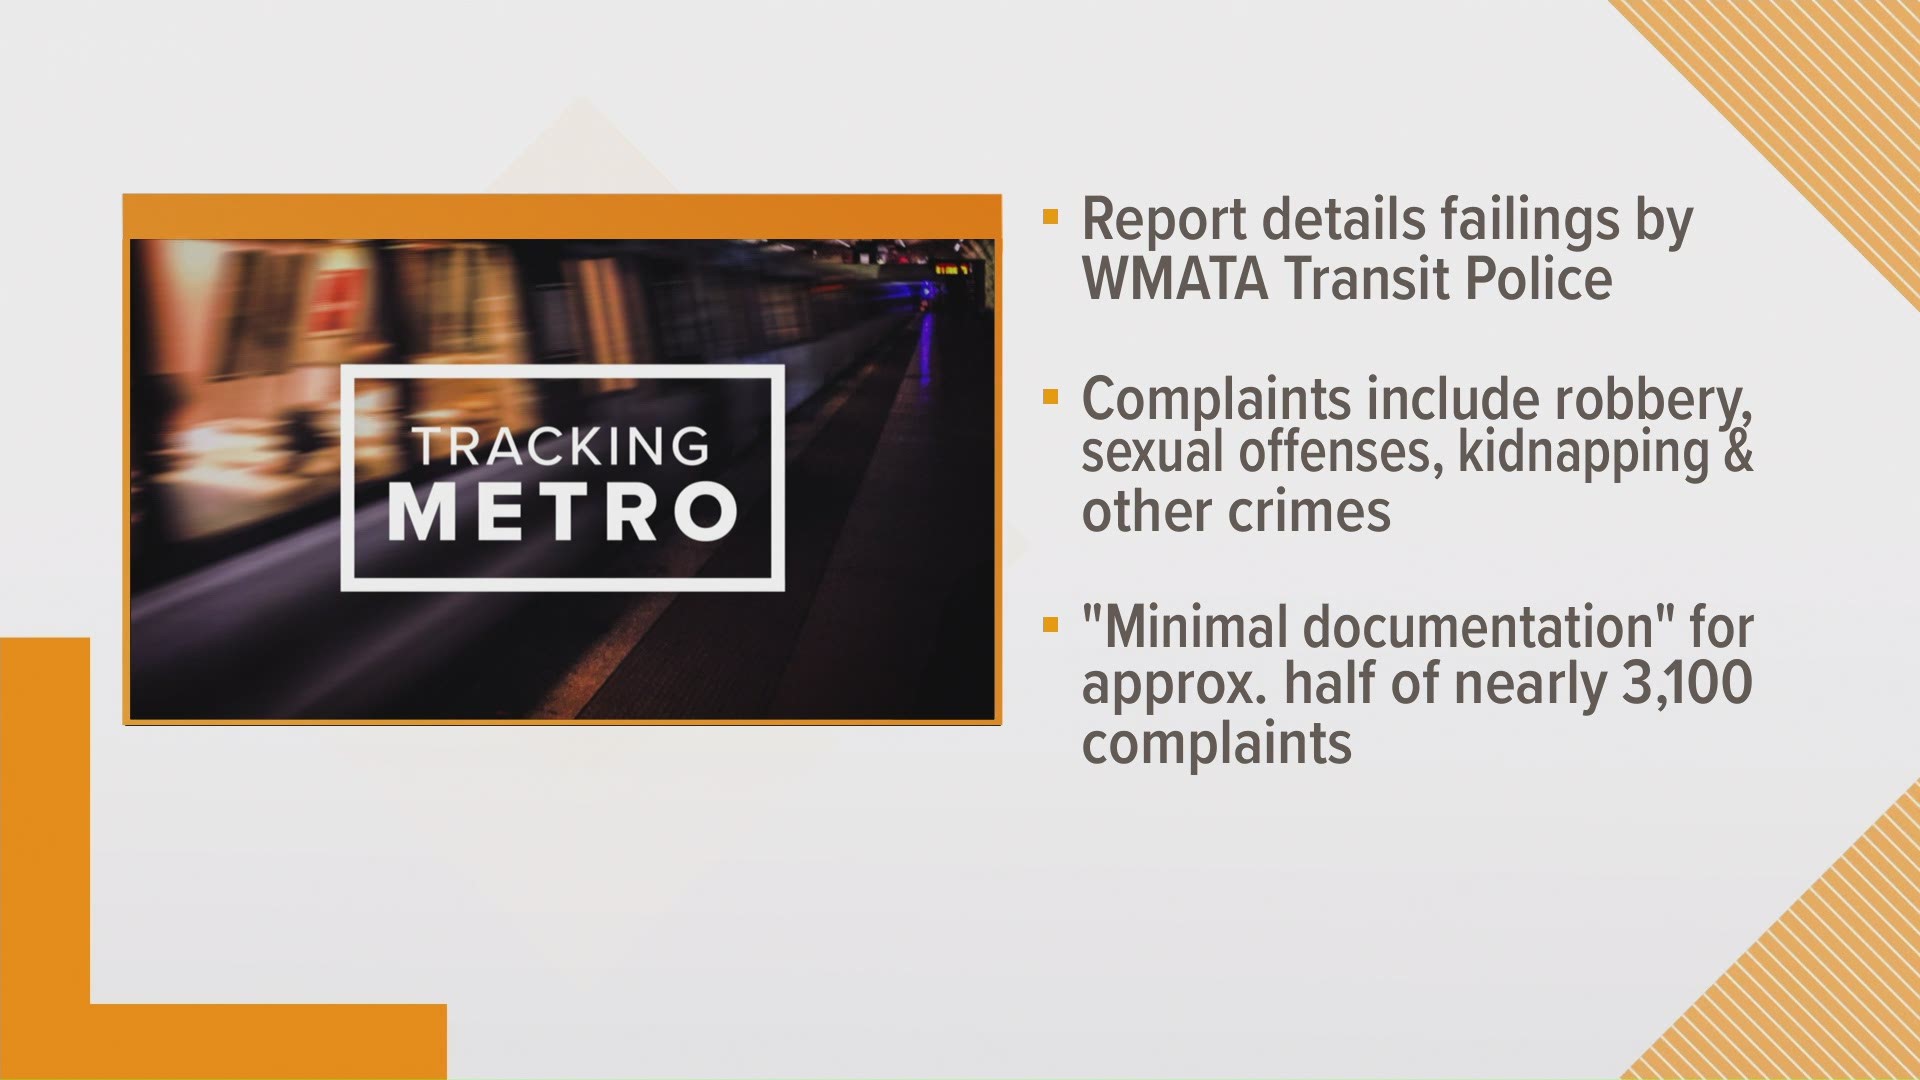 The complaints include robberies, sexual offenses, kidnapping and other crimes, according to the OIG report.